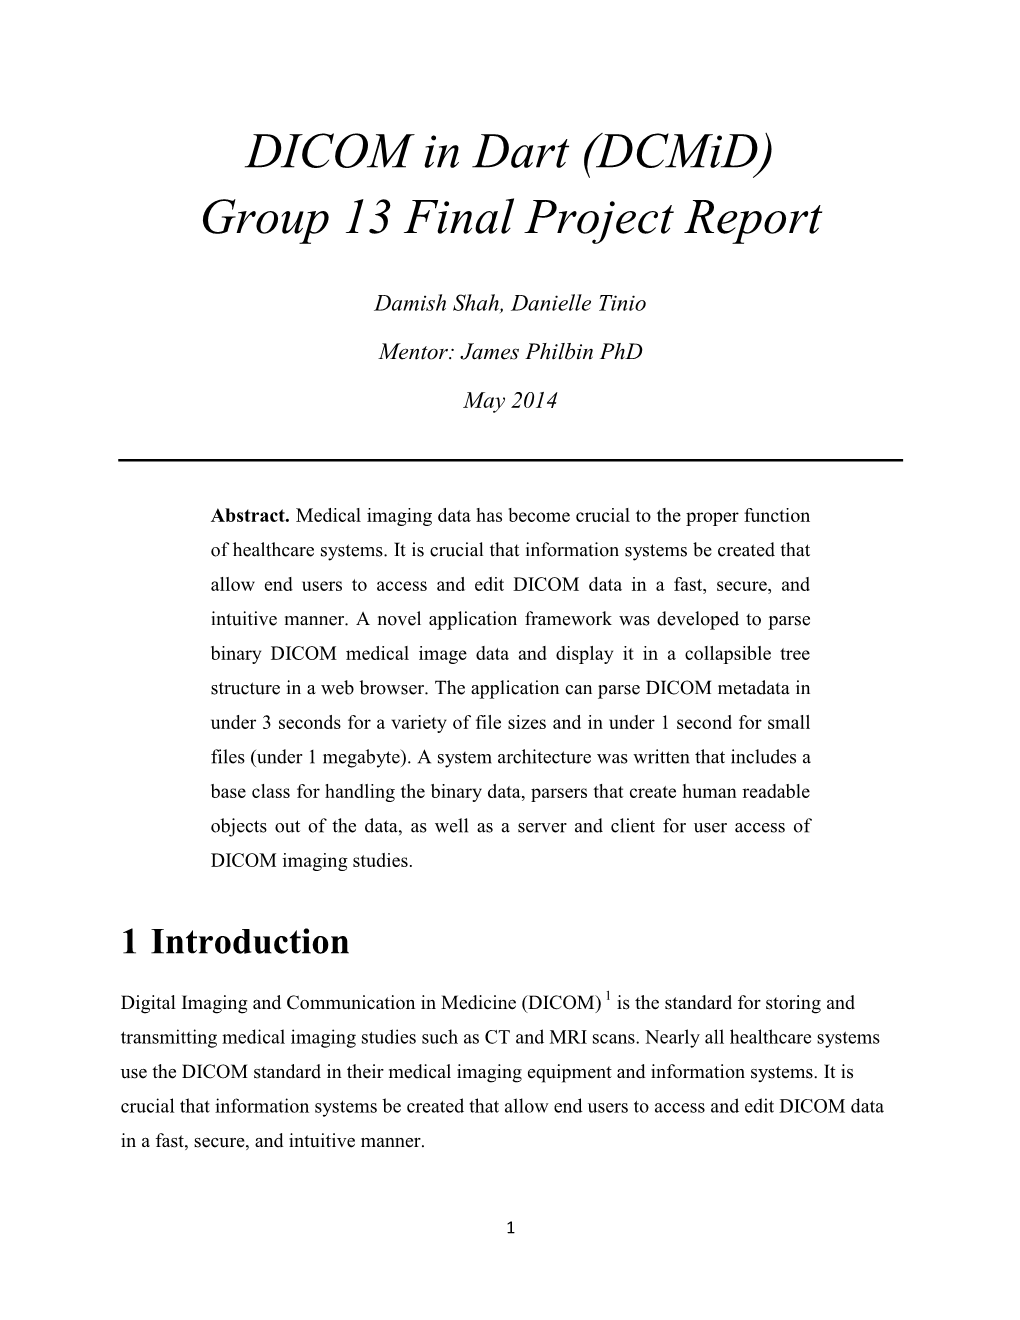 DICOM in Dart (Dcmid) Group 13 Final Project Report